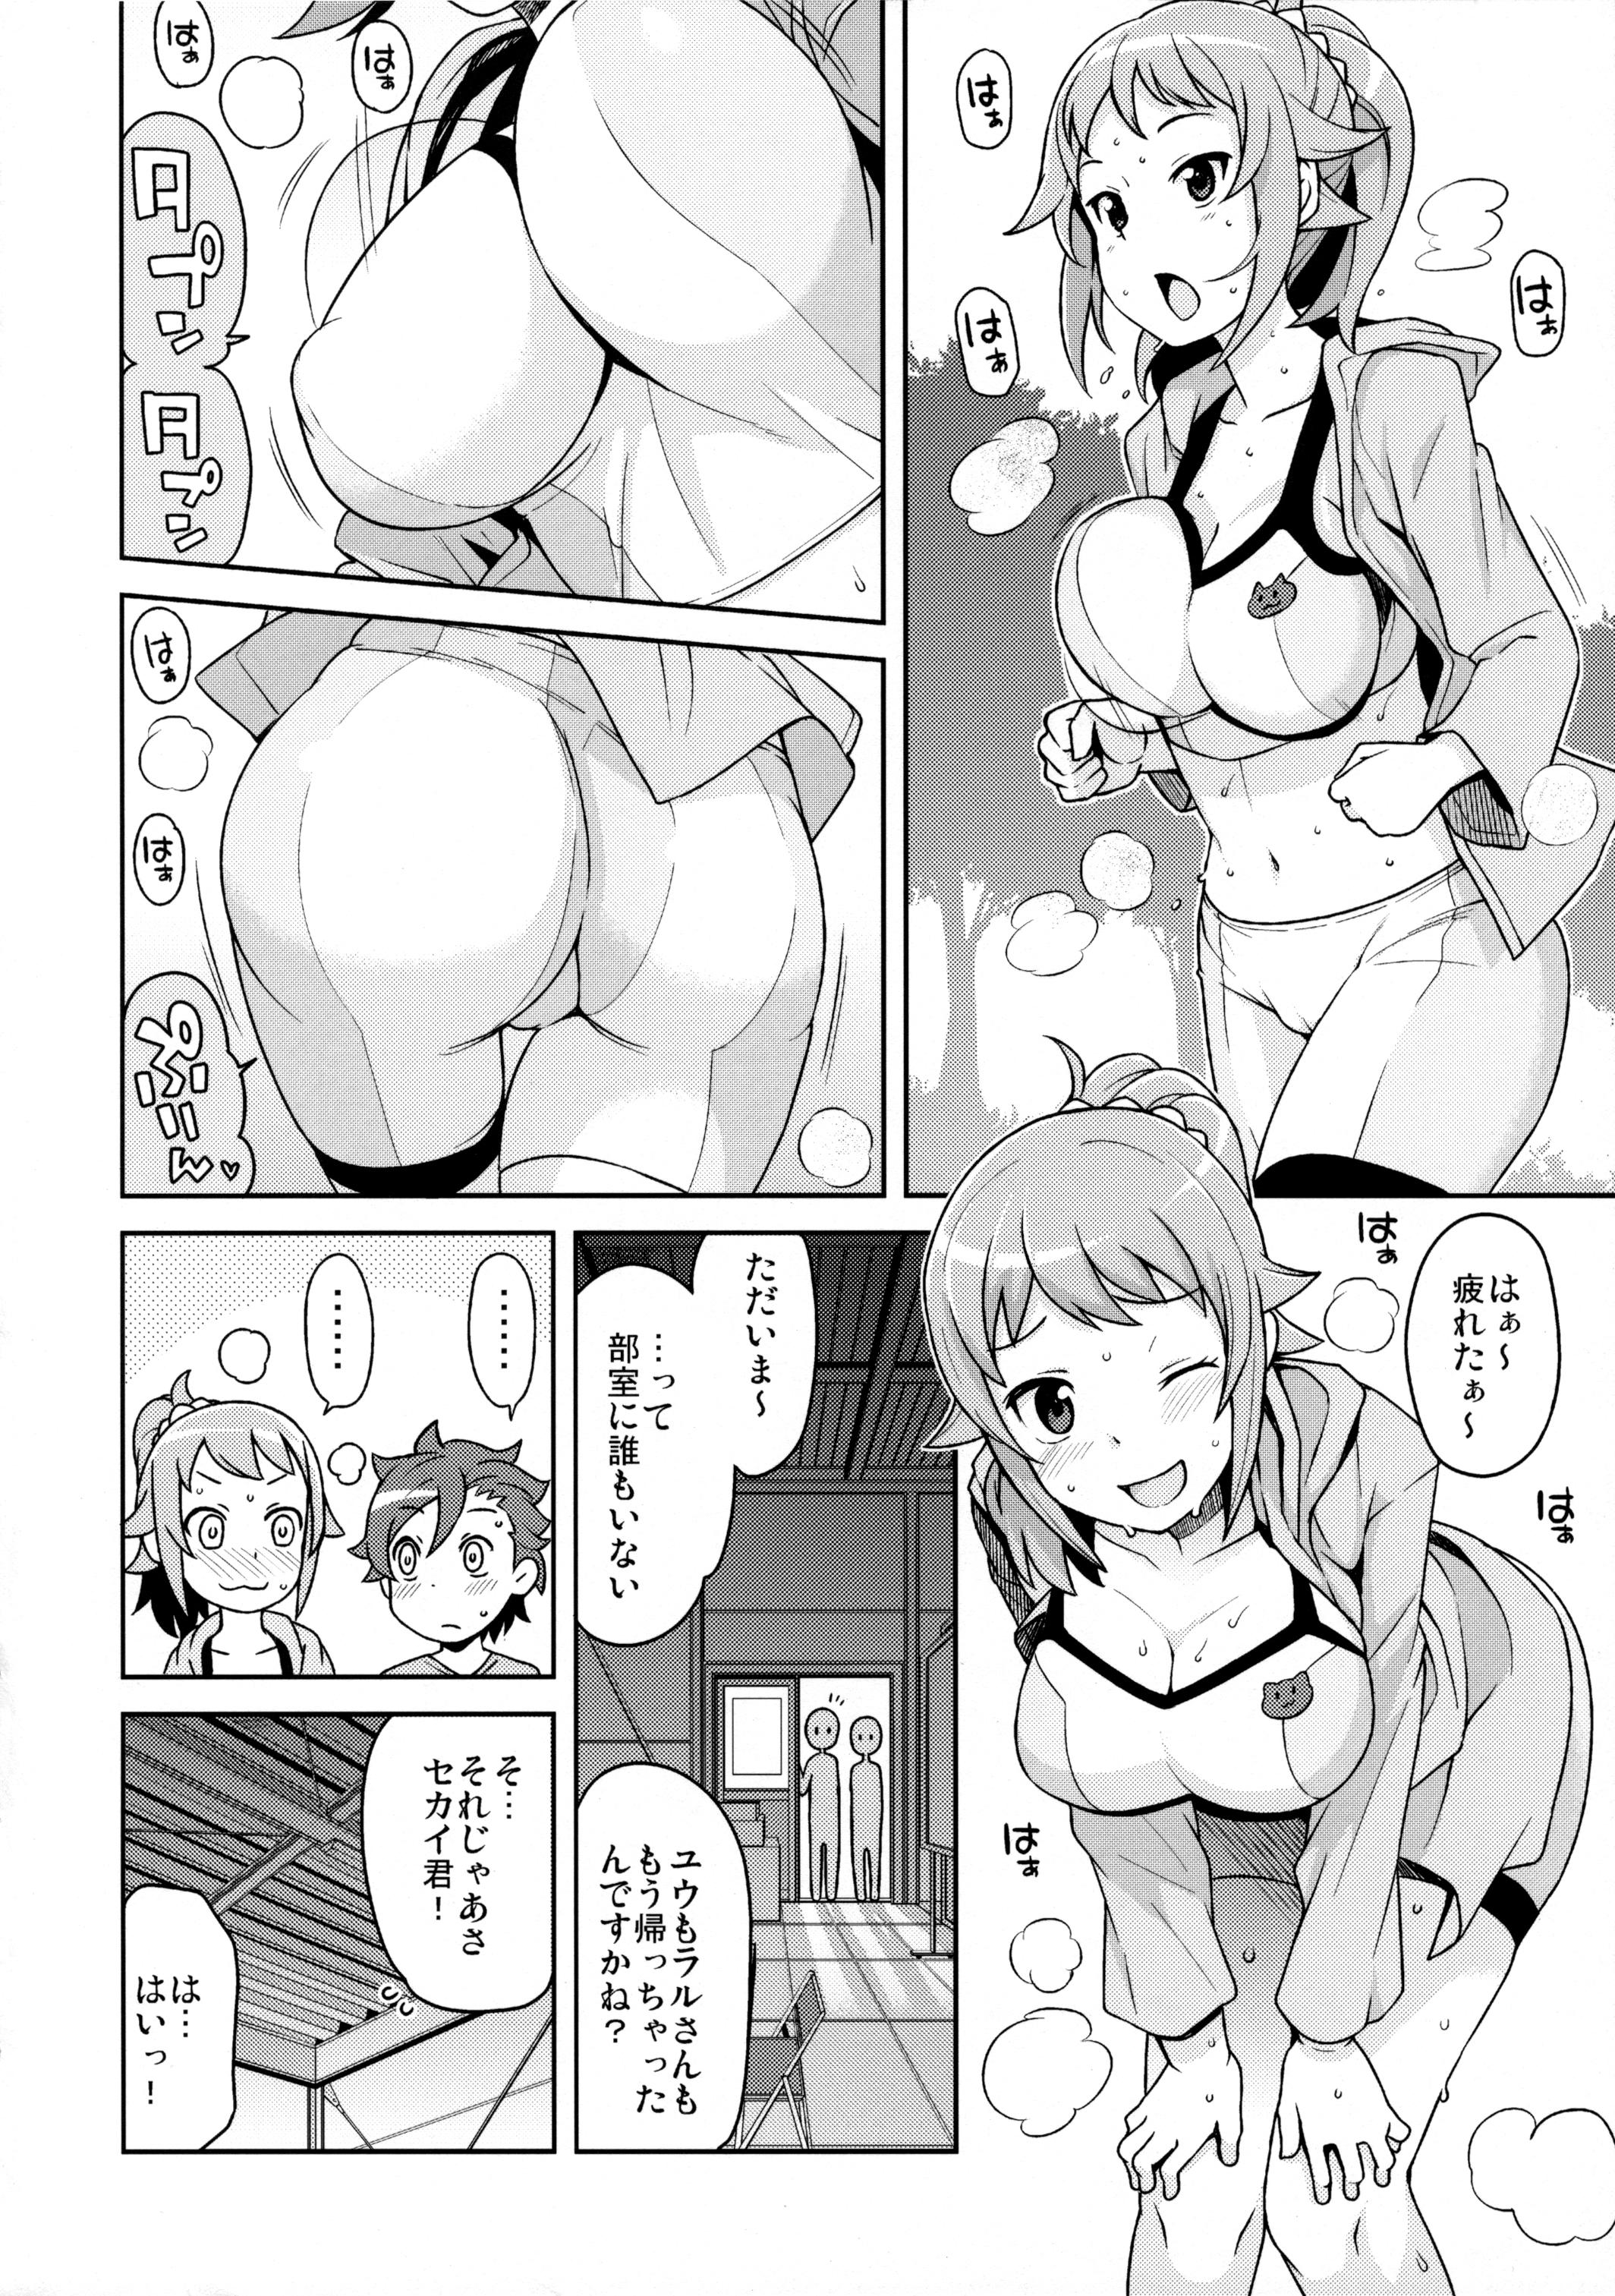 Eating Chibikko Bitch Try - Gundam build fighters try Groupsex - Page 5